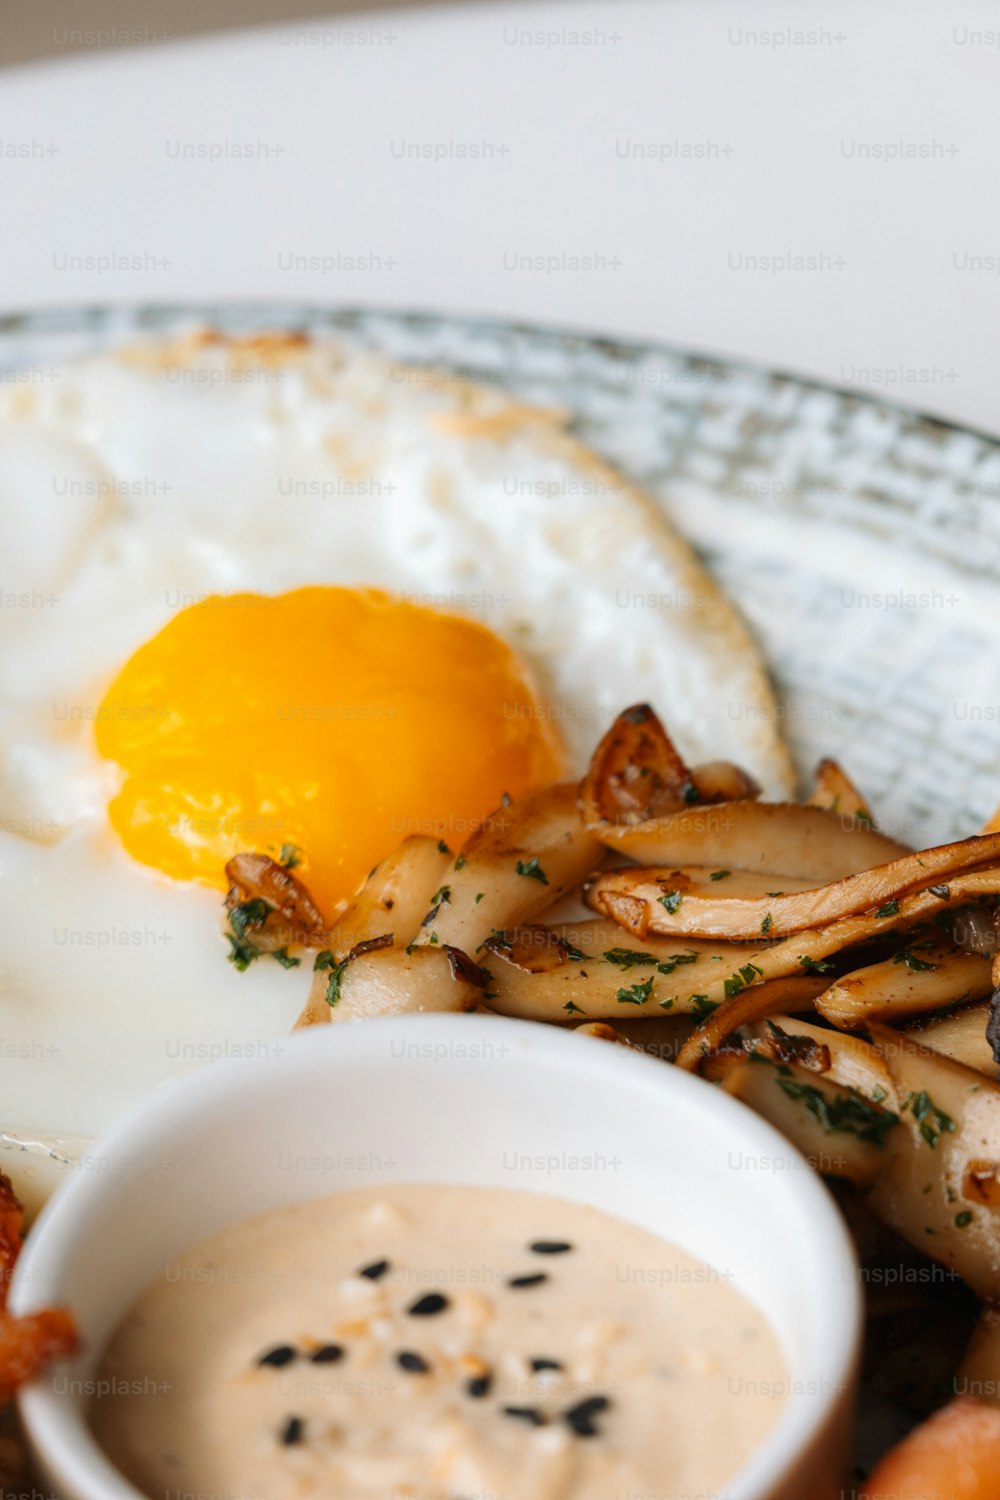 a plate of food with a fried egg and fries